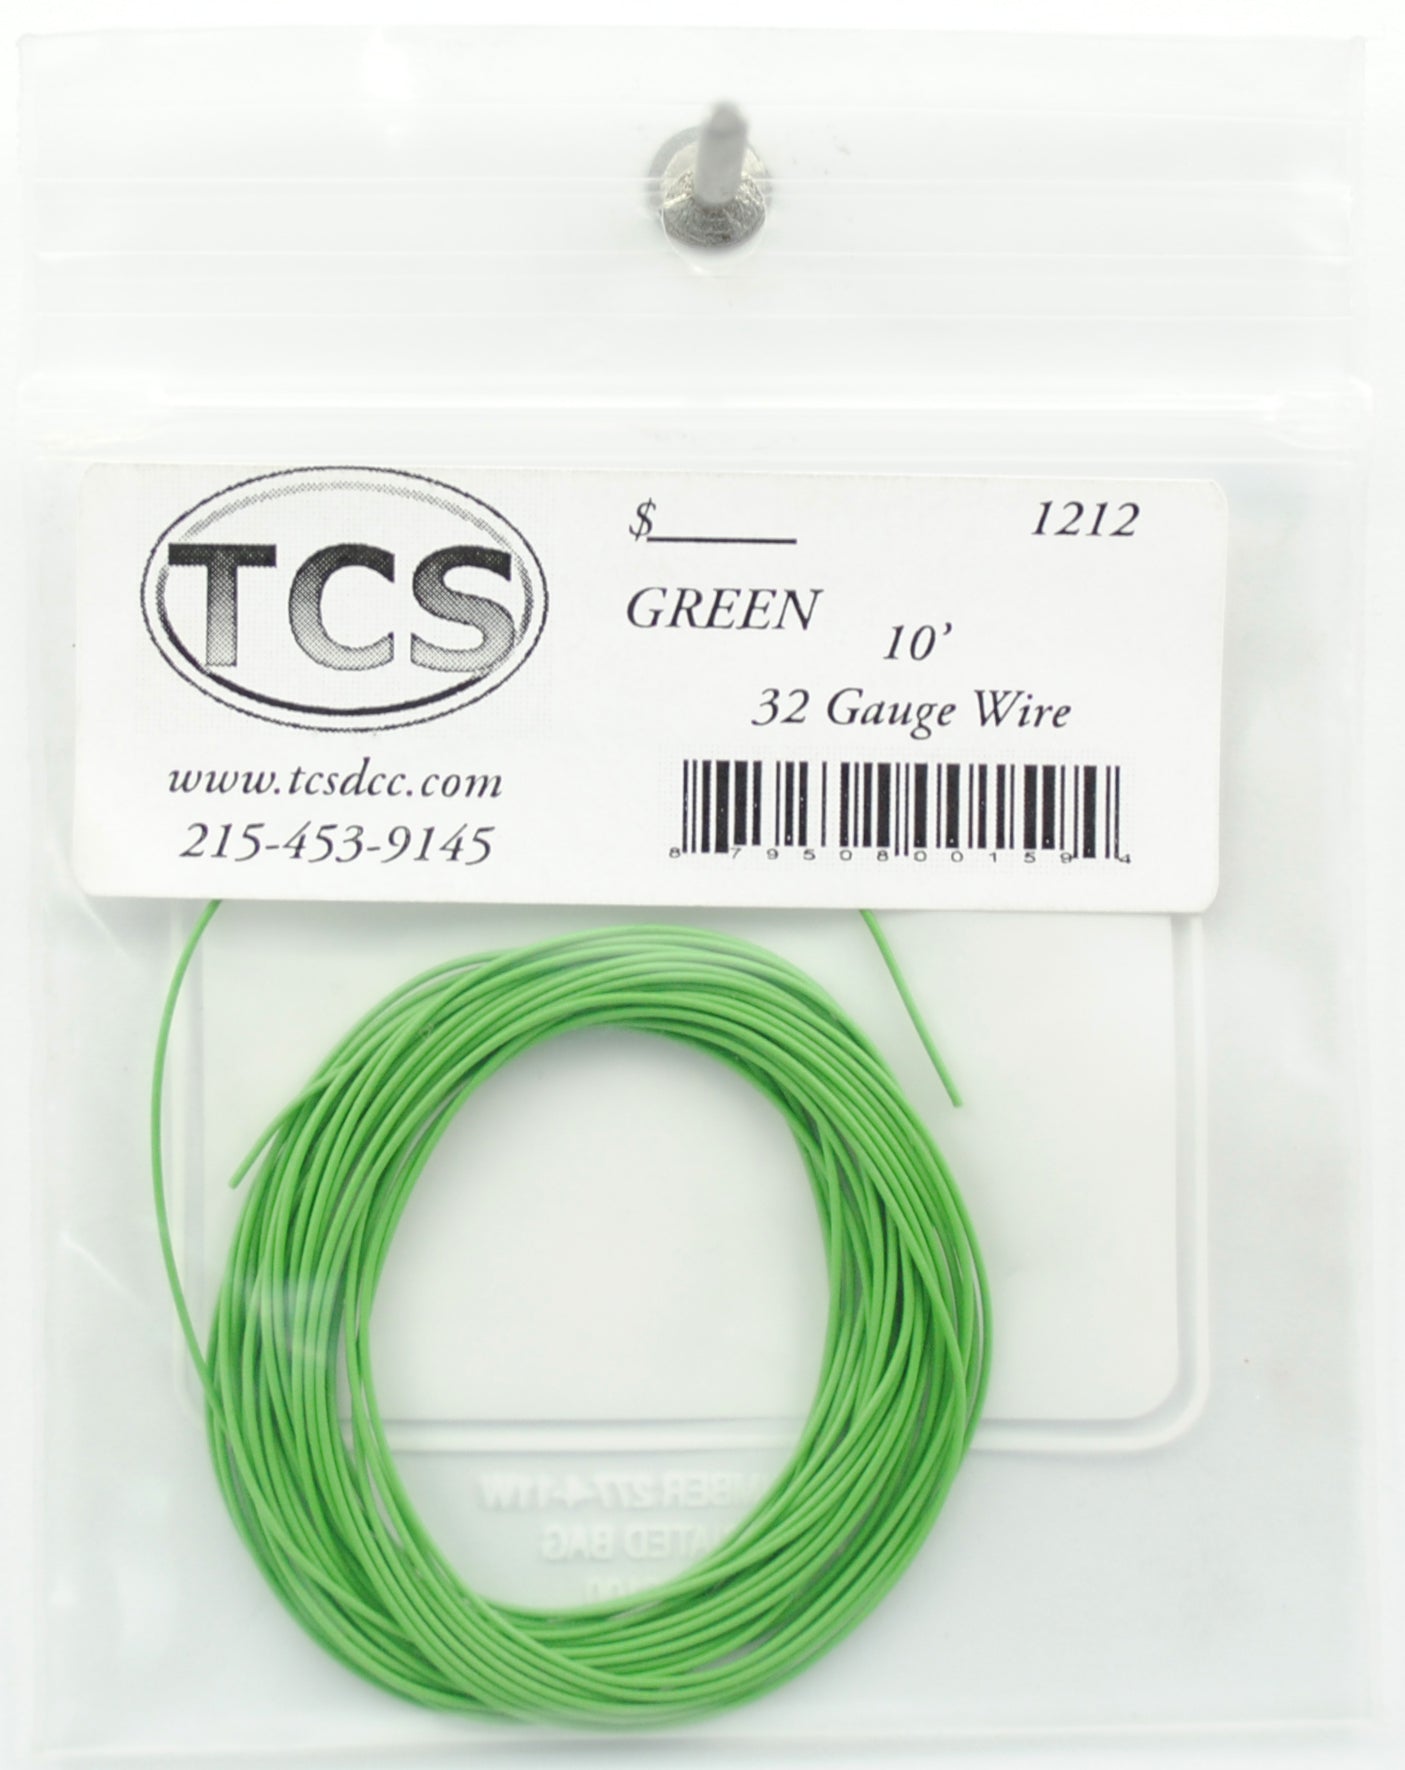 Train Control Systems 1212 10' of 32 Gauge Wire, Green